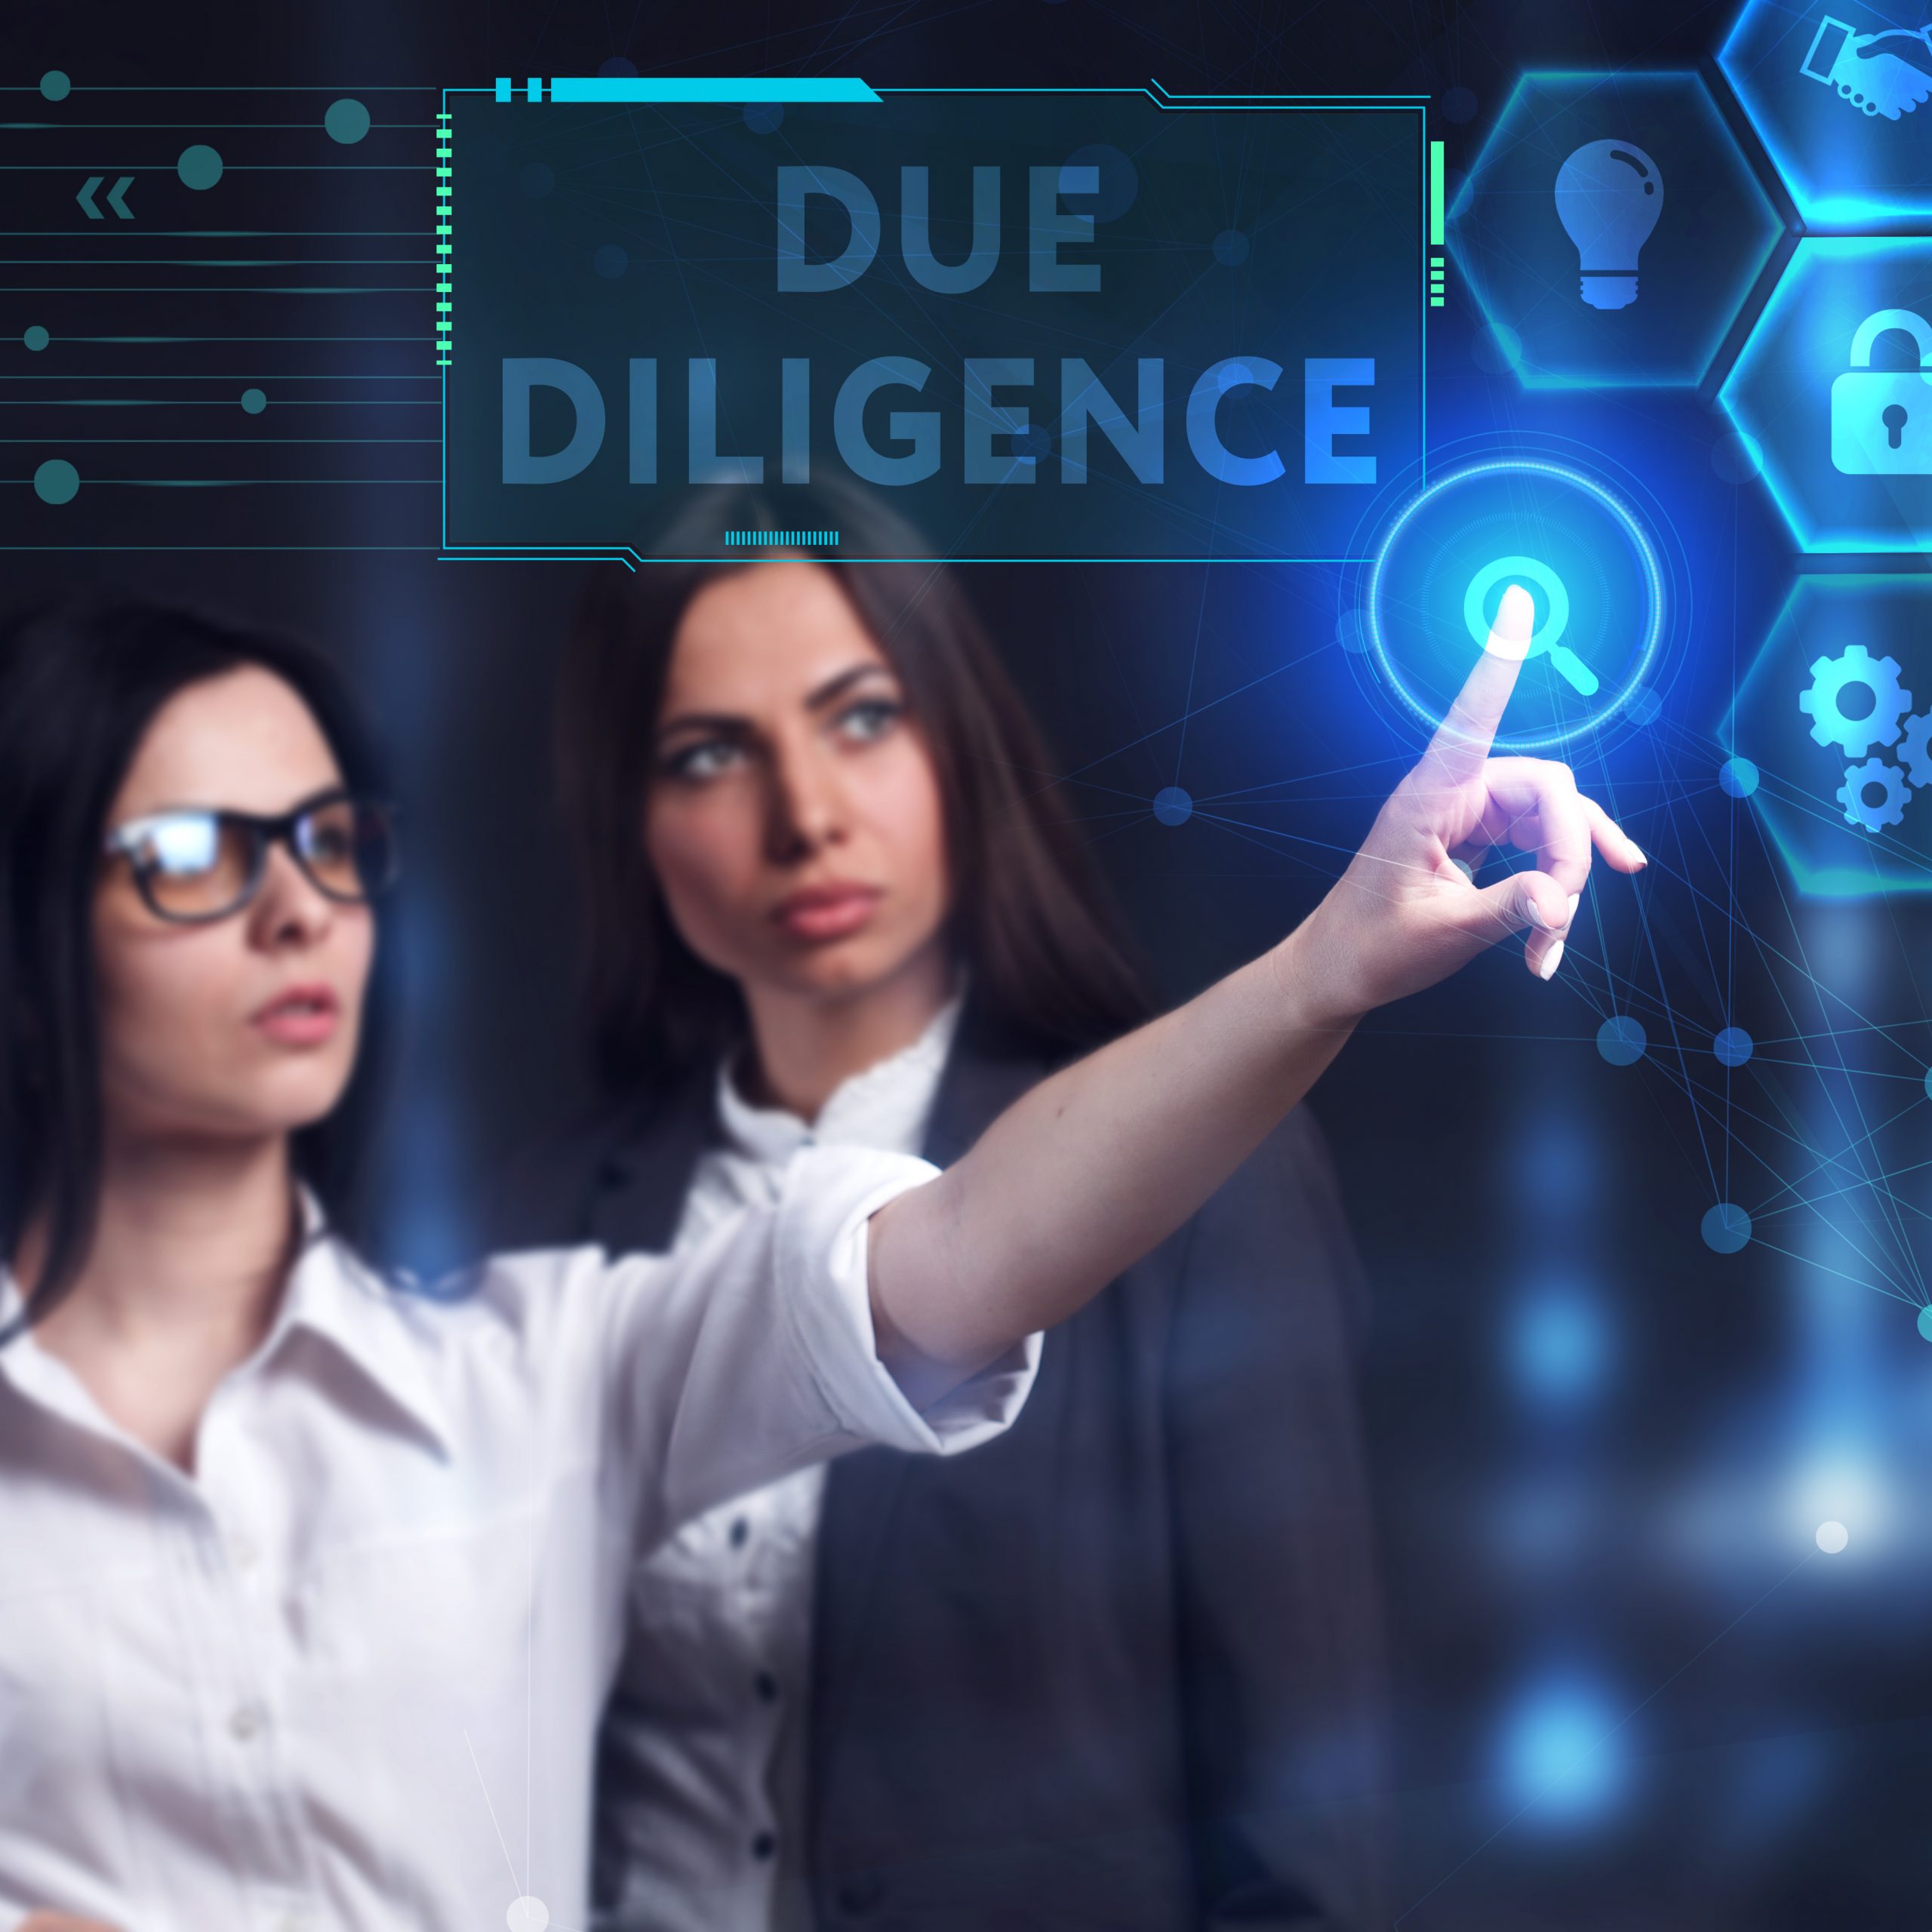 Common pitfalls in filling out enterprise/government due diligence